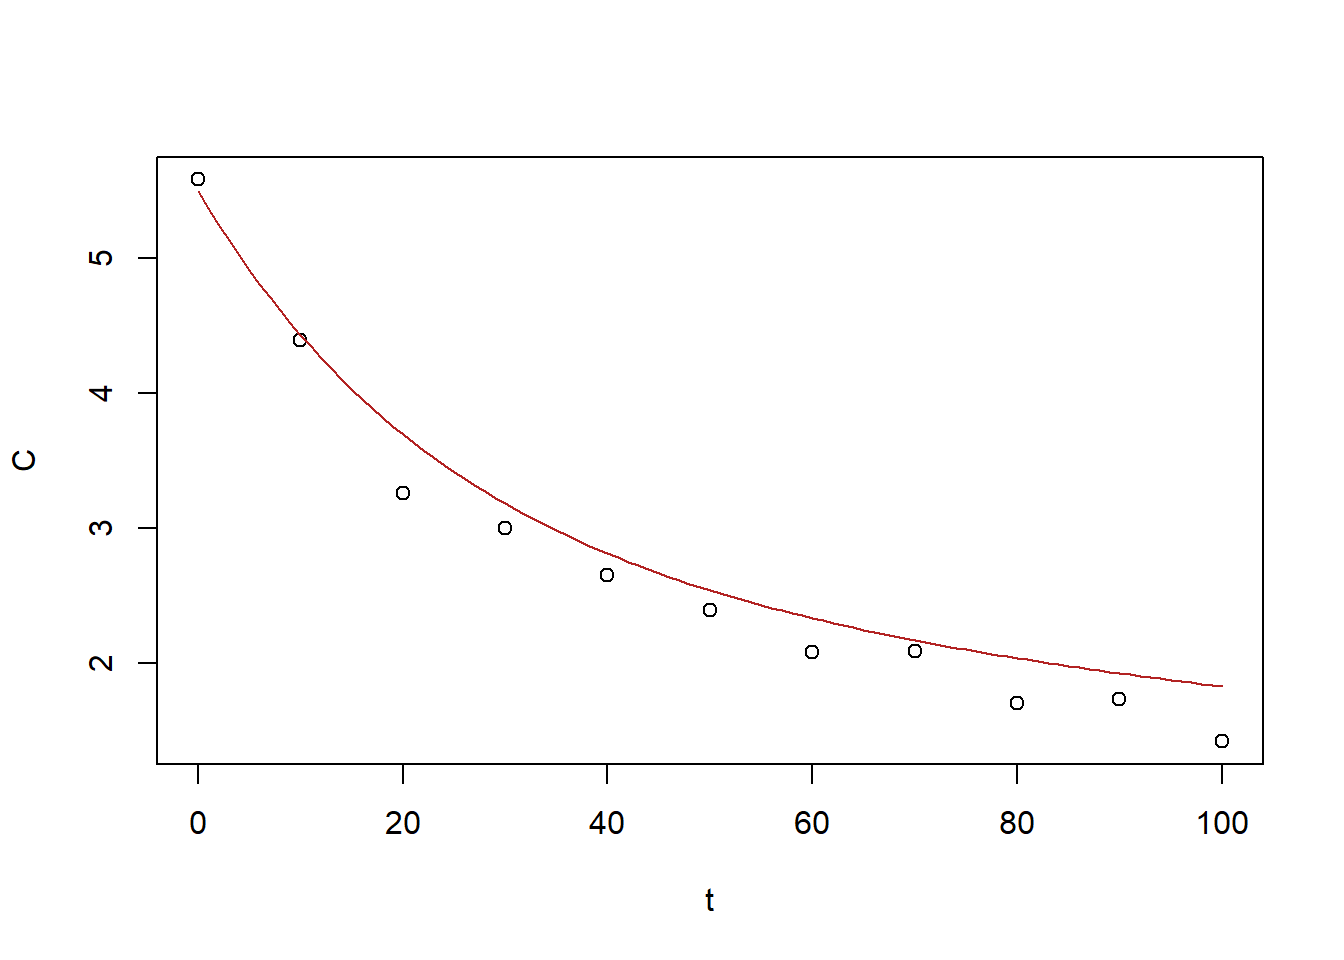 Fitted biexponential with gradient descent, as the line of best fit, as the solution is superimposed